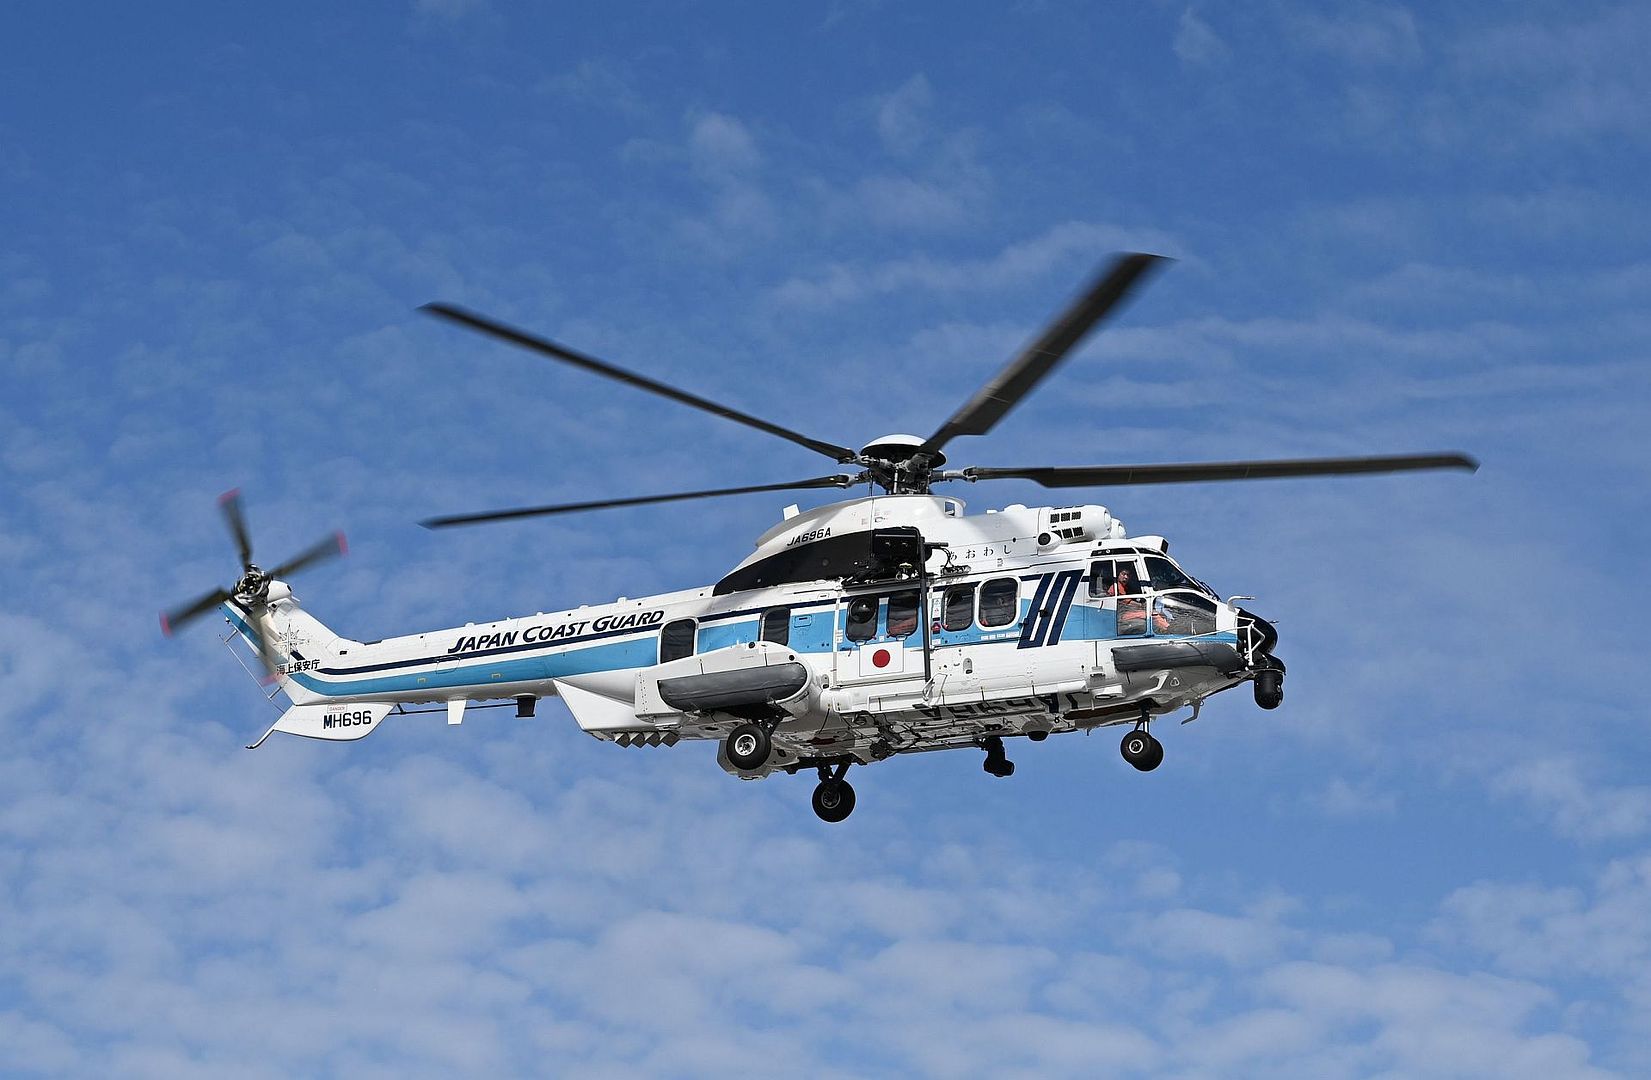 Japan Coast Guard Adds Two H225s To Growing Fleet